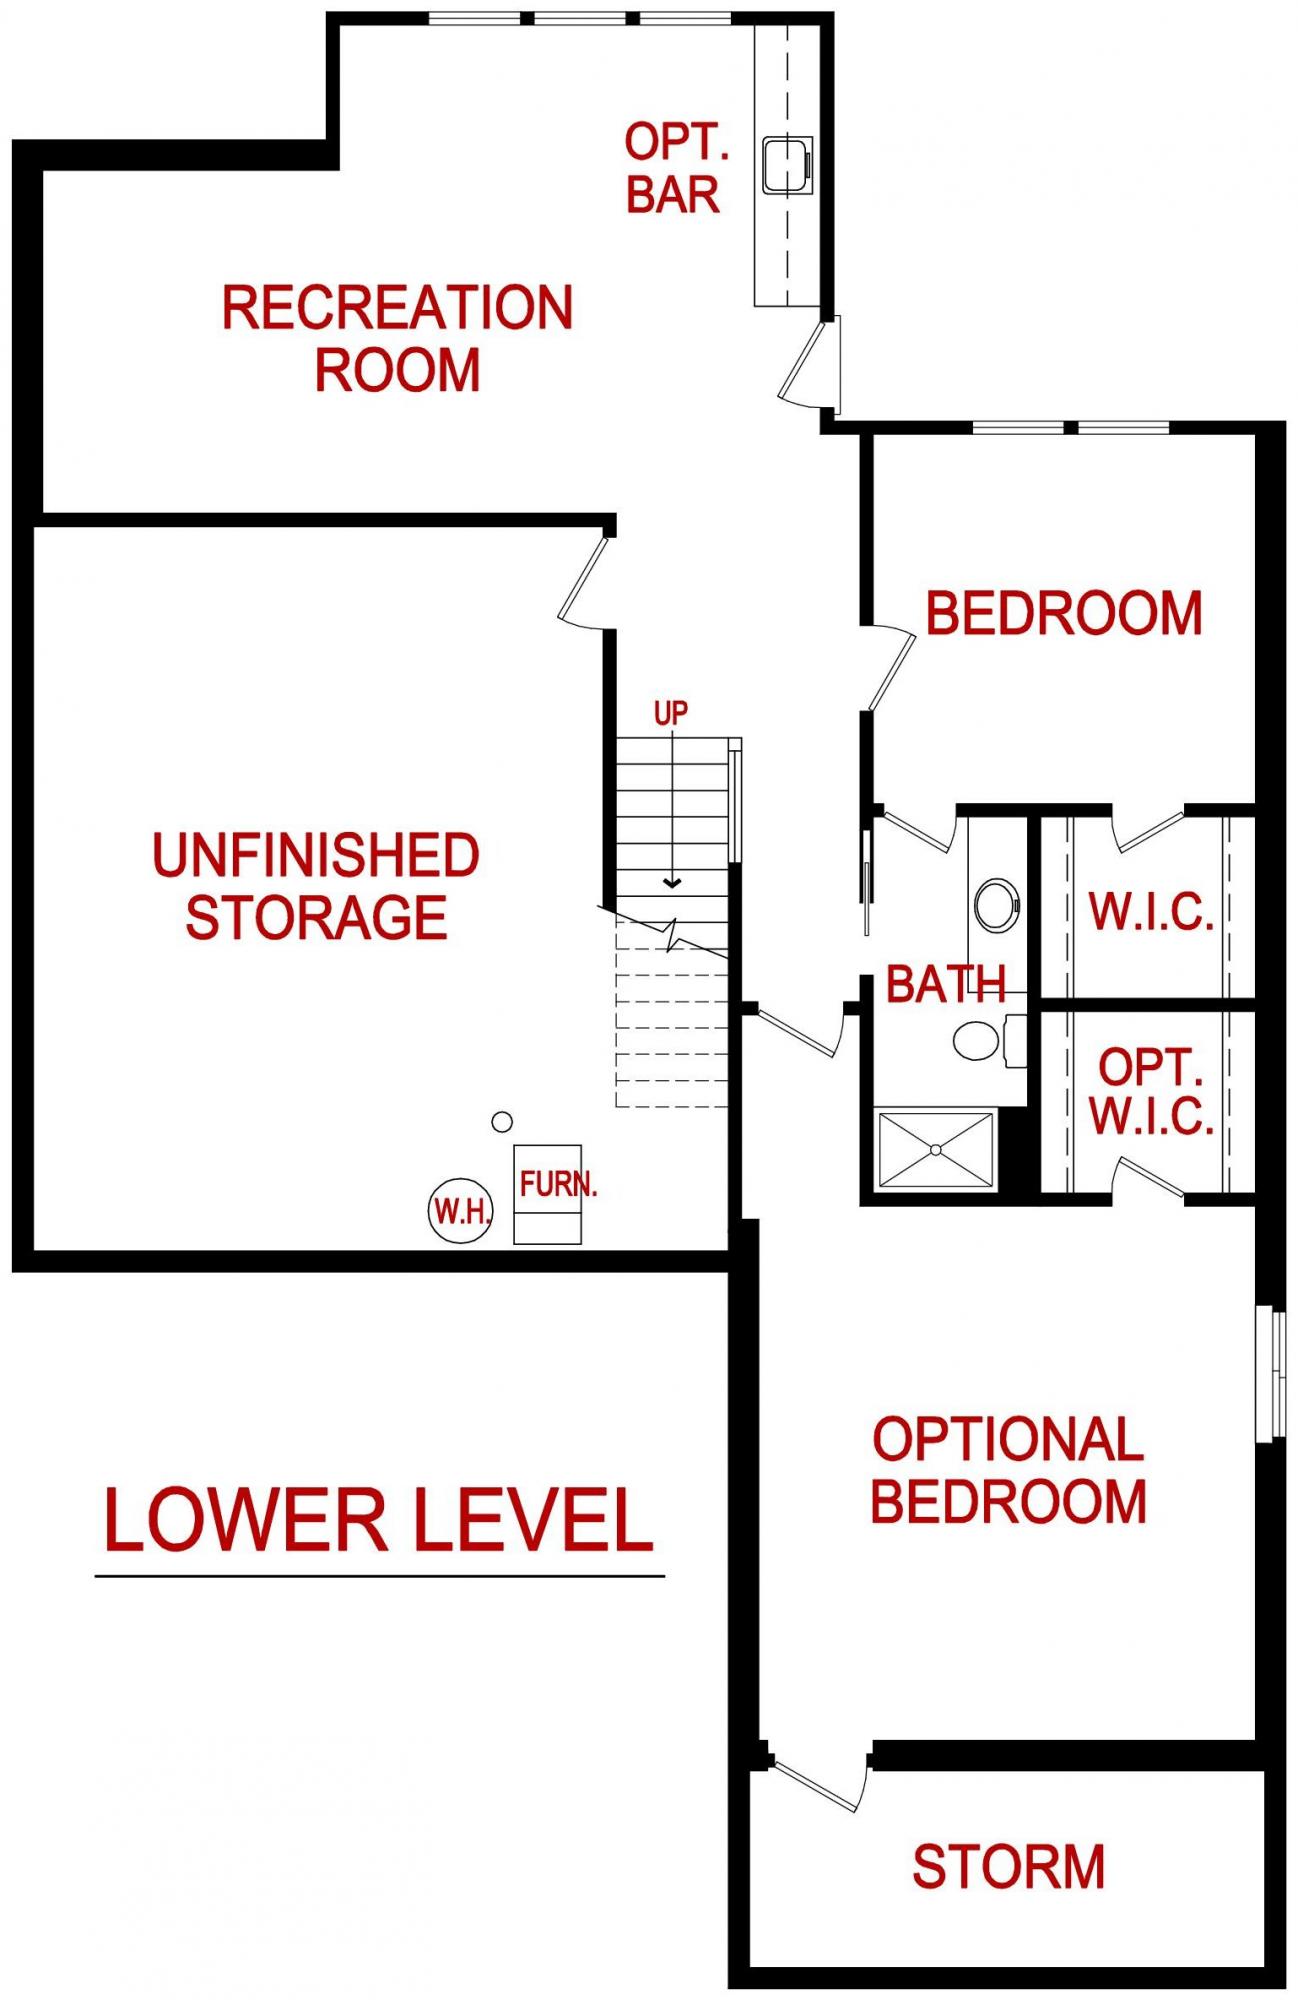 Lower level floor plan of a Holly model from Lambie custom Homes